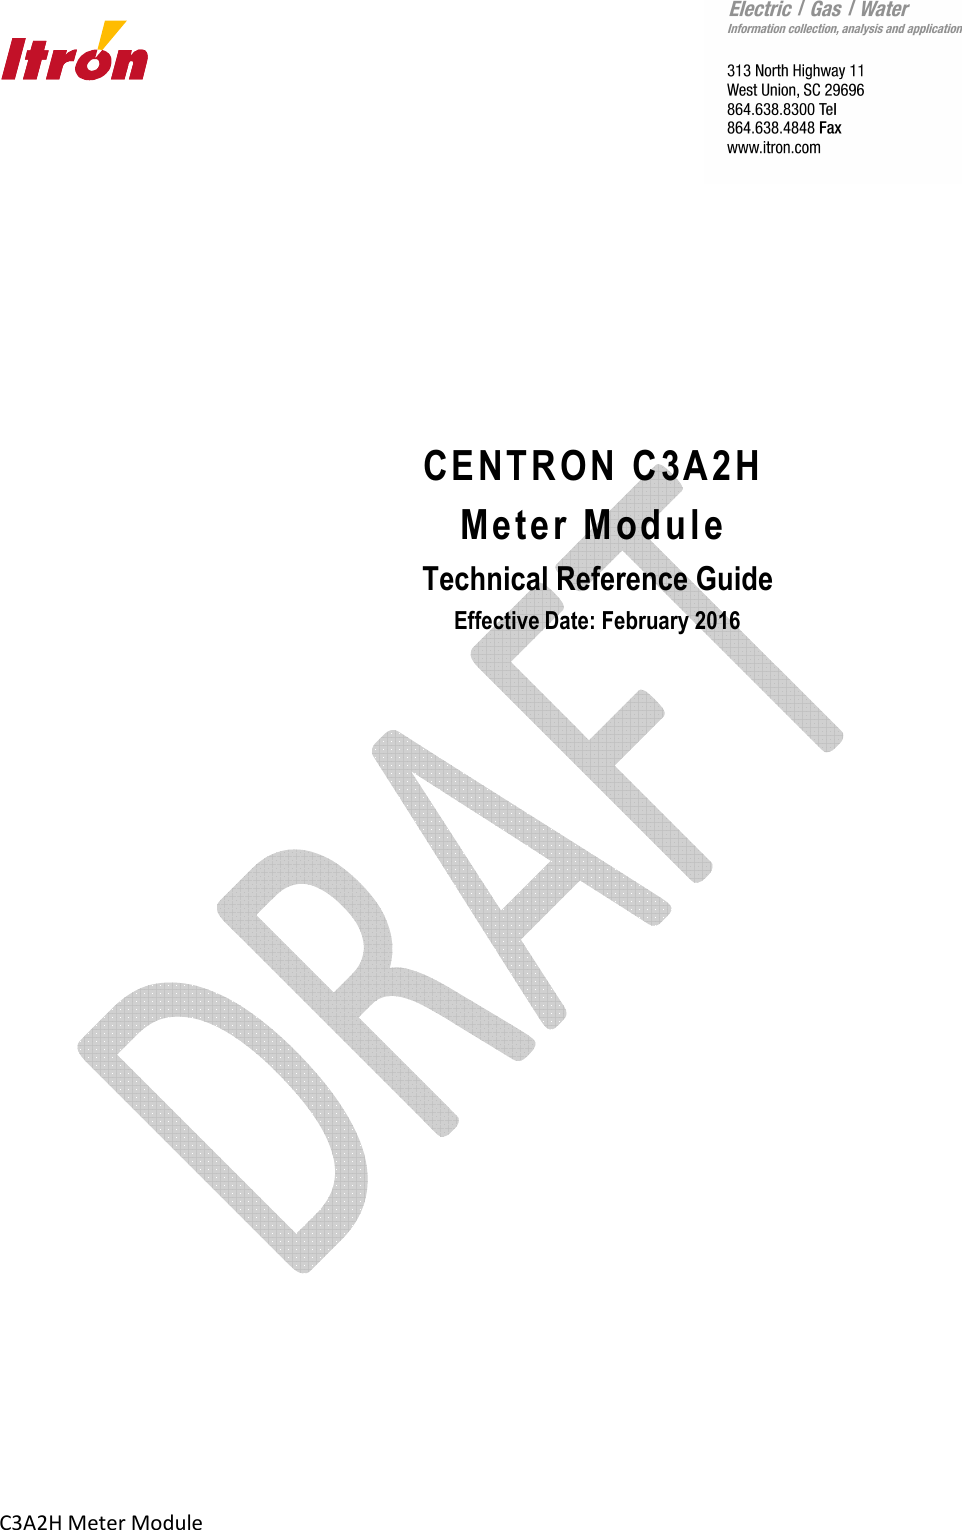       C3A2H Meter Module             CENTRON C3A2H Meter Module  Technical Reference Guide  Effective Date: February 2016     